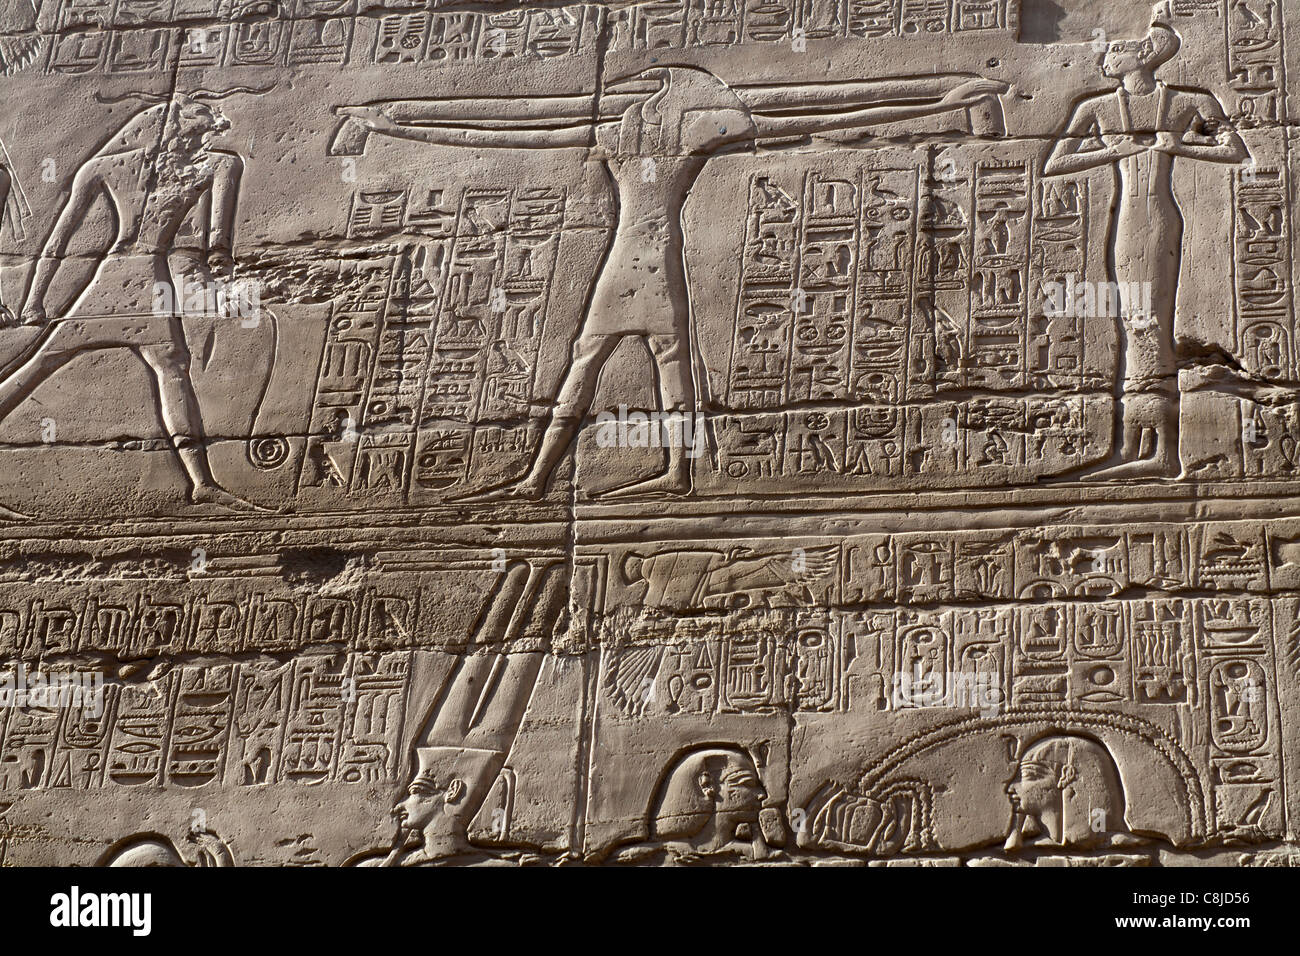 Relief work showing gods Khnum an Thoth in Hypostyle Hall at Karnak Temple, Luxor Egypt Stock Photo